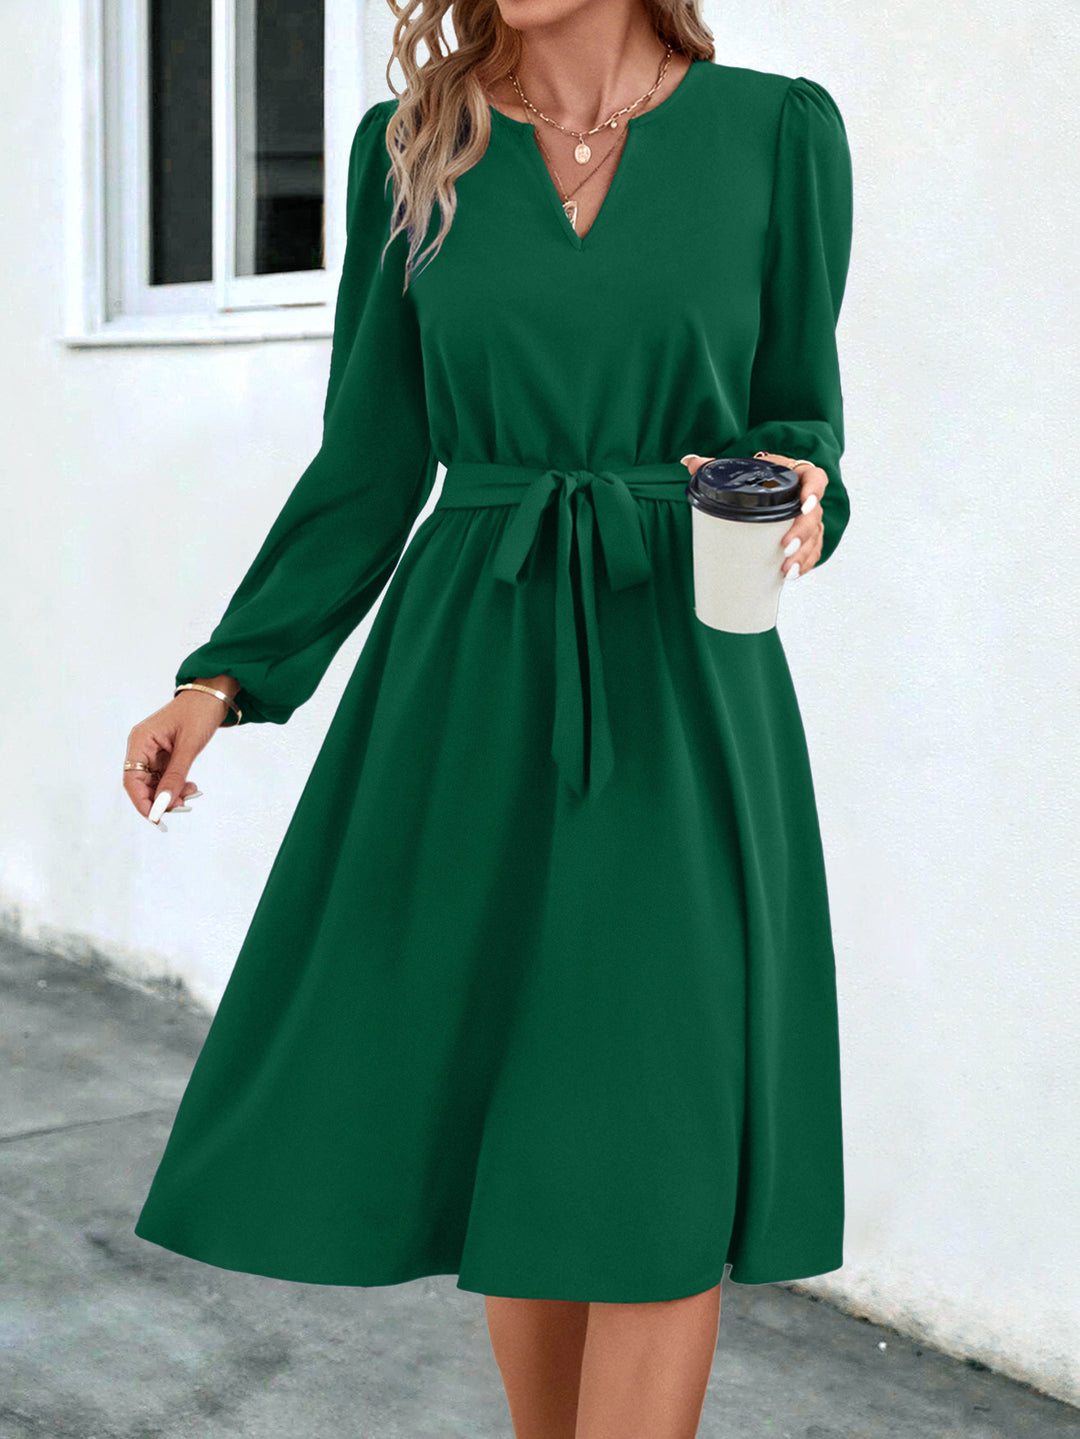 Autumn And Winter European And American Women's Clothing Long Sleeve Small V-neck Lace Up Dress